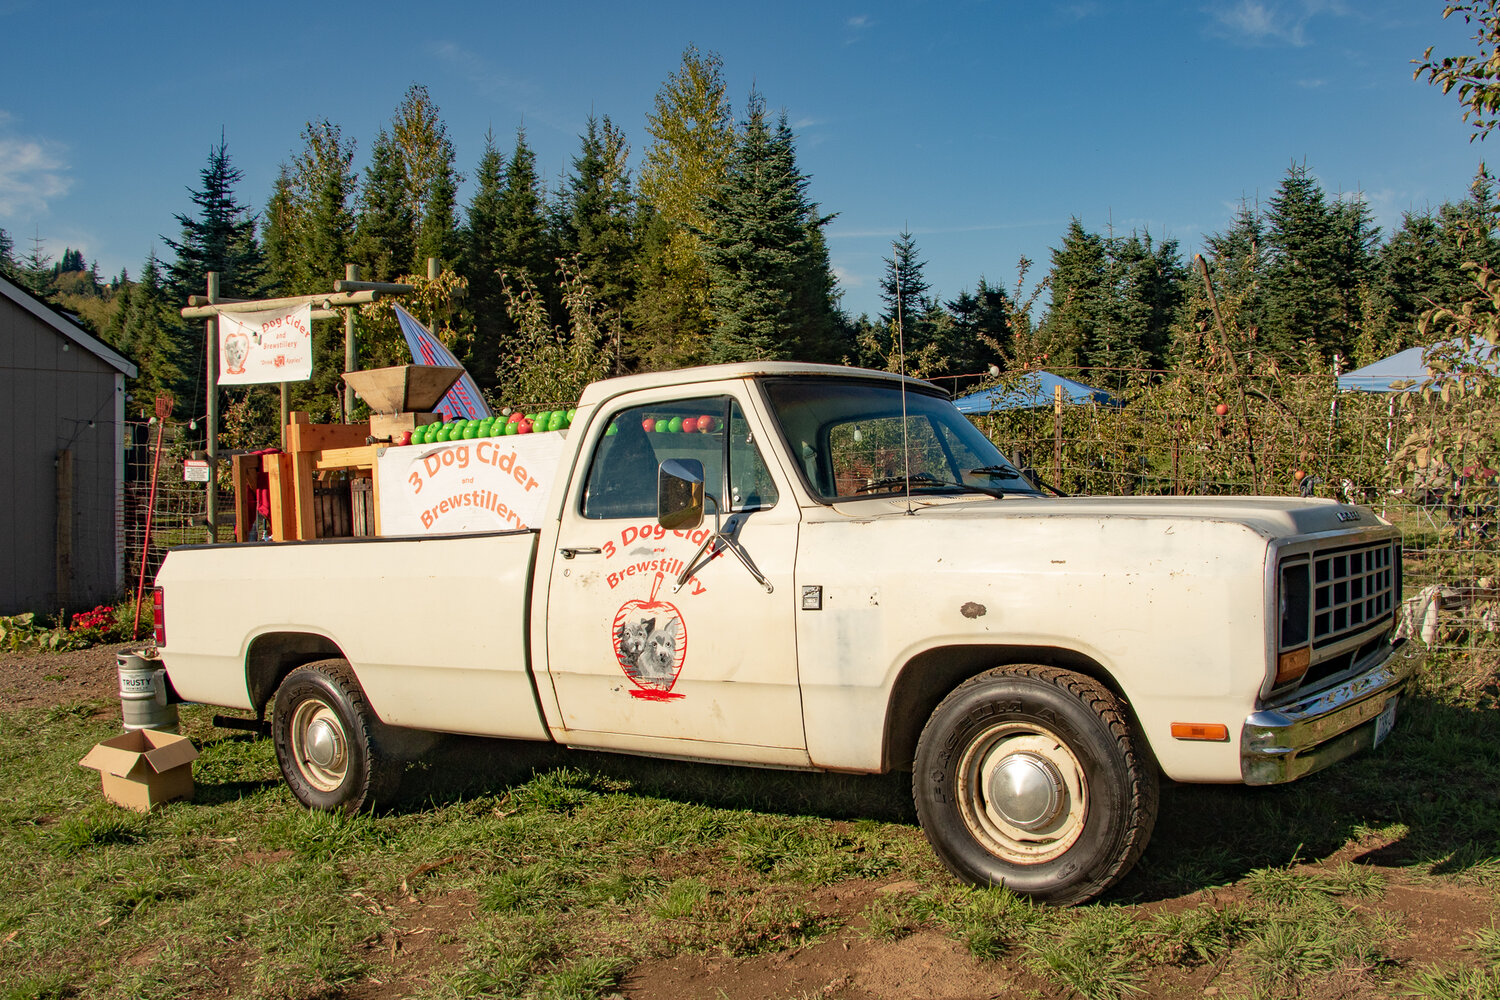 The 3 Dogs Cider and Brewstillery work truck sits parked outside of the apple orchard in Silver Creek during the Onalaska Apple Harvest Festival on Sunday, Oct. 8.